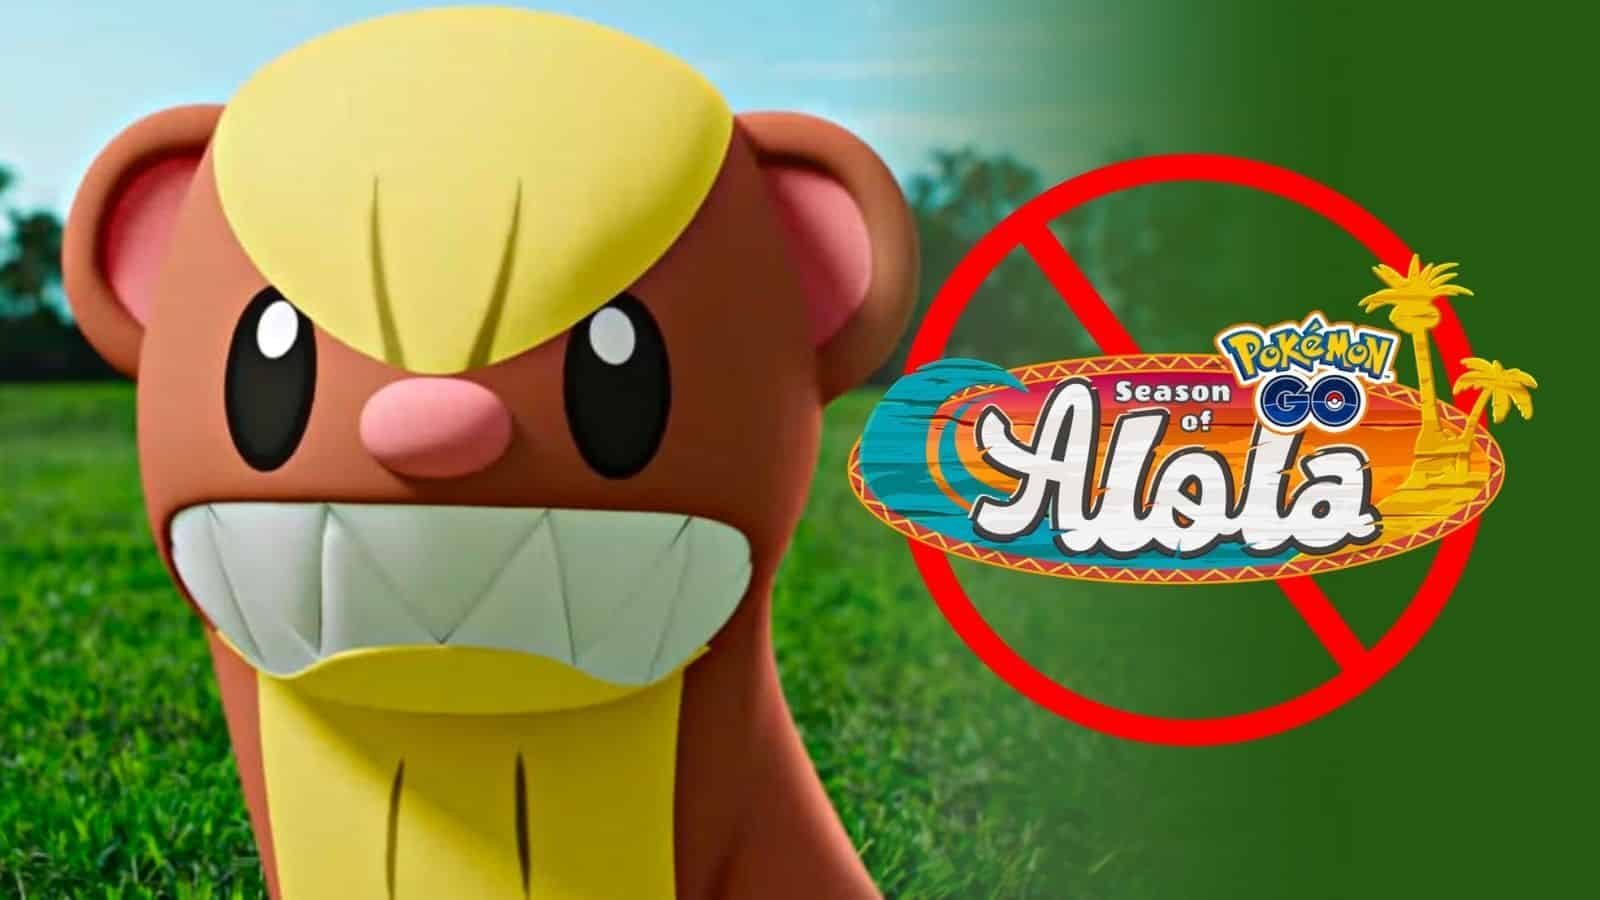 Pokemon Go's Season of Alola should have revived the game, but Niantic  failed - Dexerto